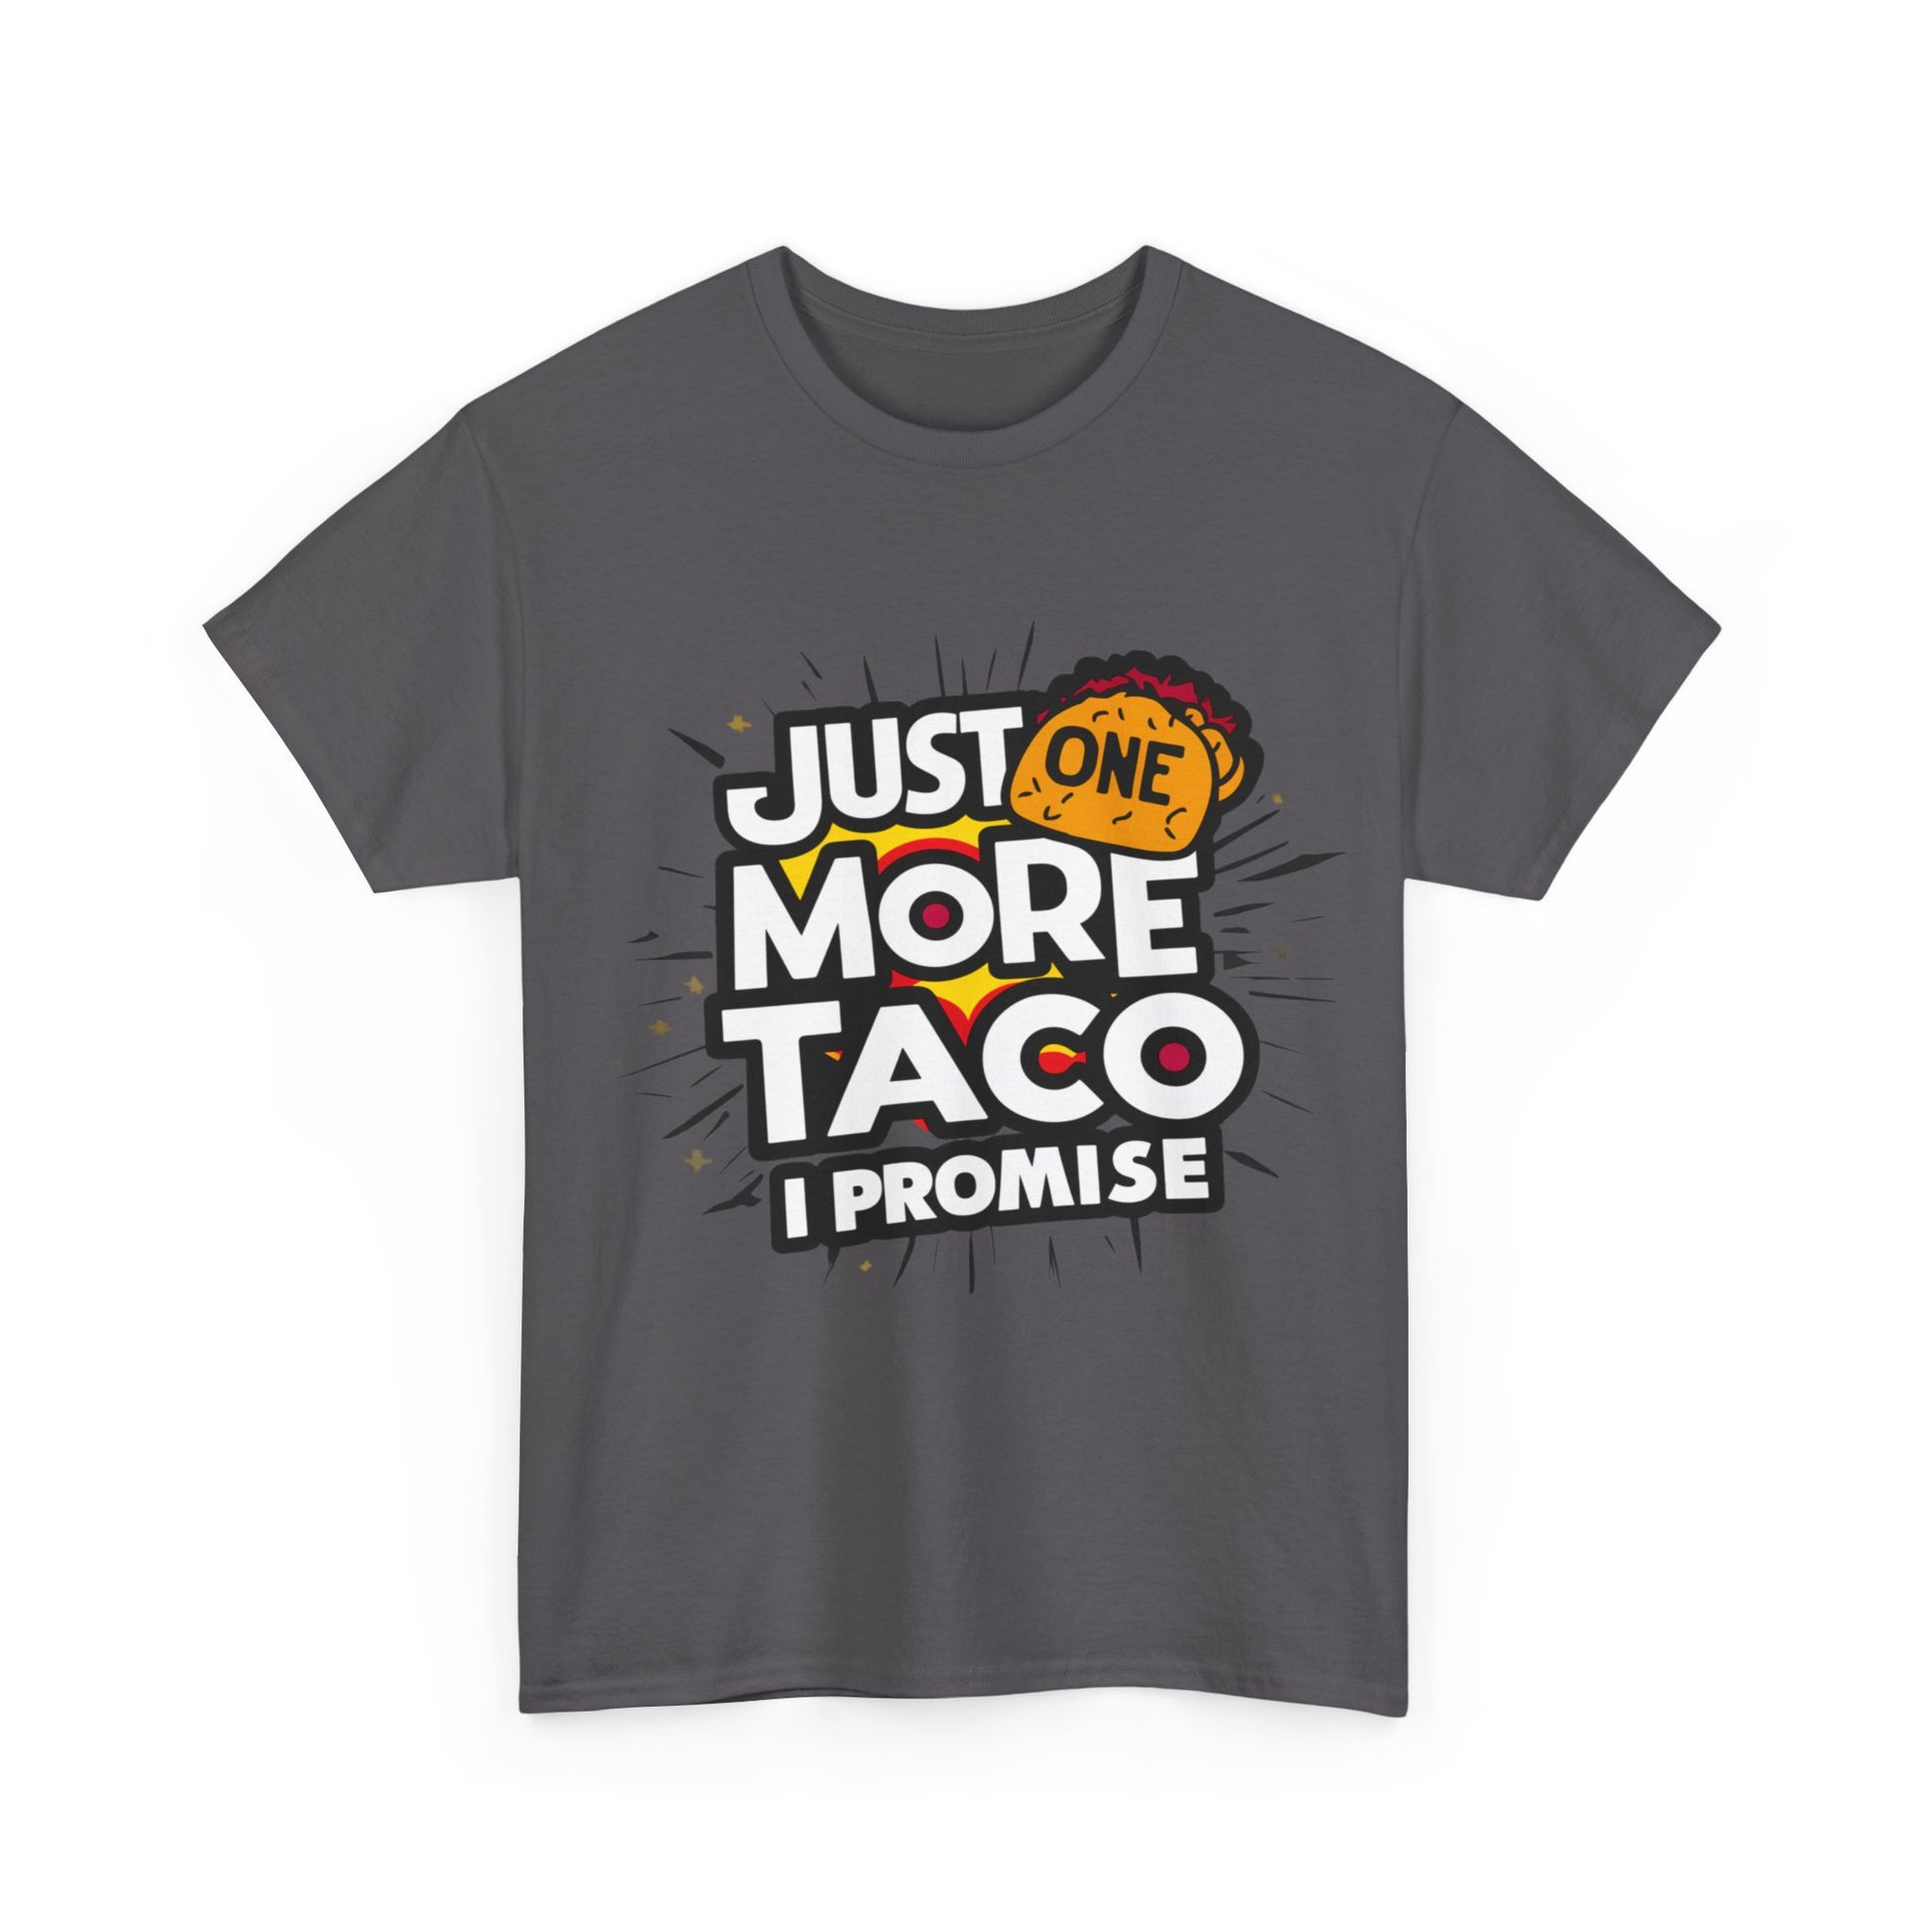 Copy of Just One More Taco I Promise Mexican Food Graphic Unisex Heavy Cotton Tee Cotton Funny Humorous Graphic Soft Premium Unisex Men Women Charcoal T-shirt Birthday Gift-18